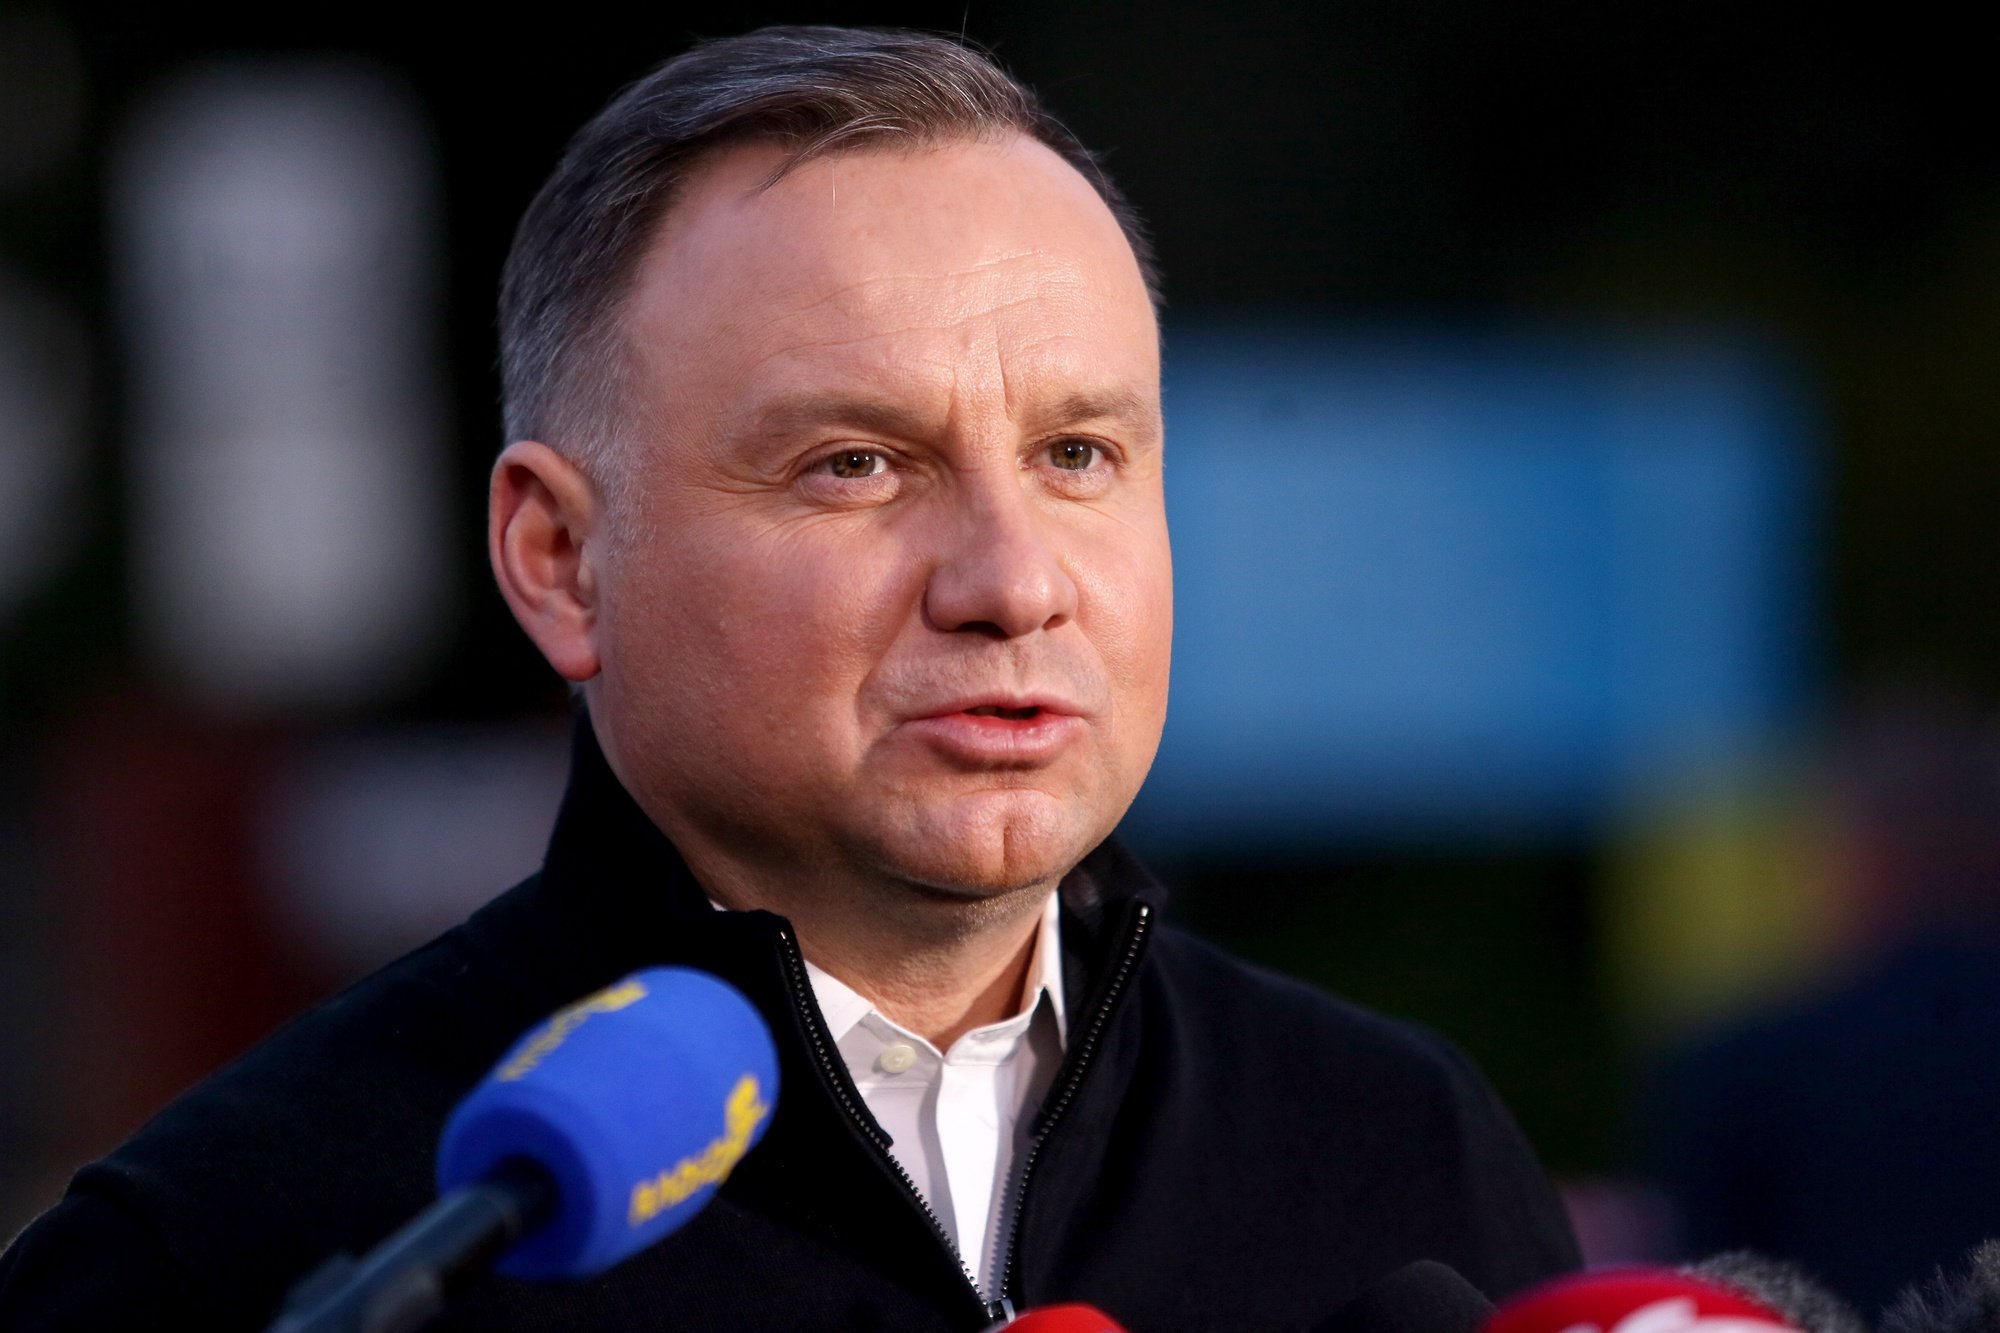 epa09904970 Polish President Andrzej Duda during a press conference in front of the Zofiowka coal mine in Jastrzebie-Zdroj, southern Poland, 23 April 2022. A tremor shook the Zofiowka coal mine in the early hours on 23 April, leaving ten miners missing, according to a statement by the mining conglomerate JSW, the mine owner. The tremor involved &#039;an intensive outflow of methane&#039;, JSW said. Twelve rescue teams have been trying to reach the missing miners. High concentration of methane may hinder the rescue operation as the pipeline supplying fresh air to the location has been damaged. A rescue operation is currently underway.  EPA/ZBIGNIEW MEISSNER POLAND OUT